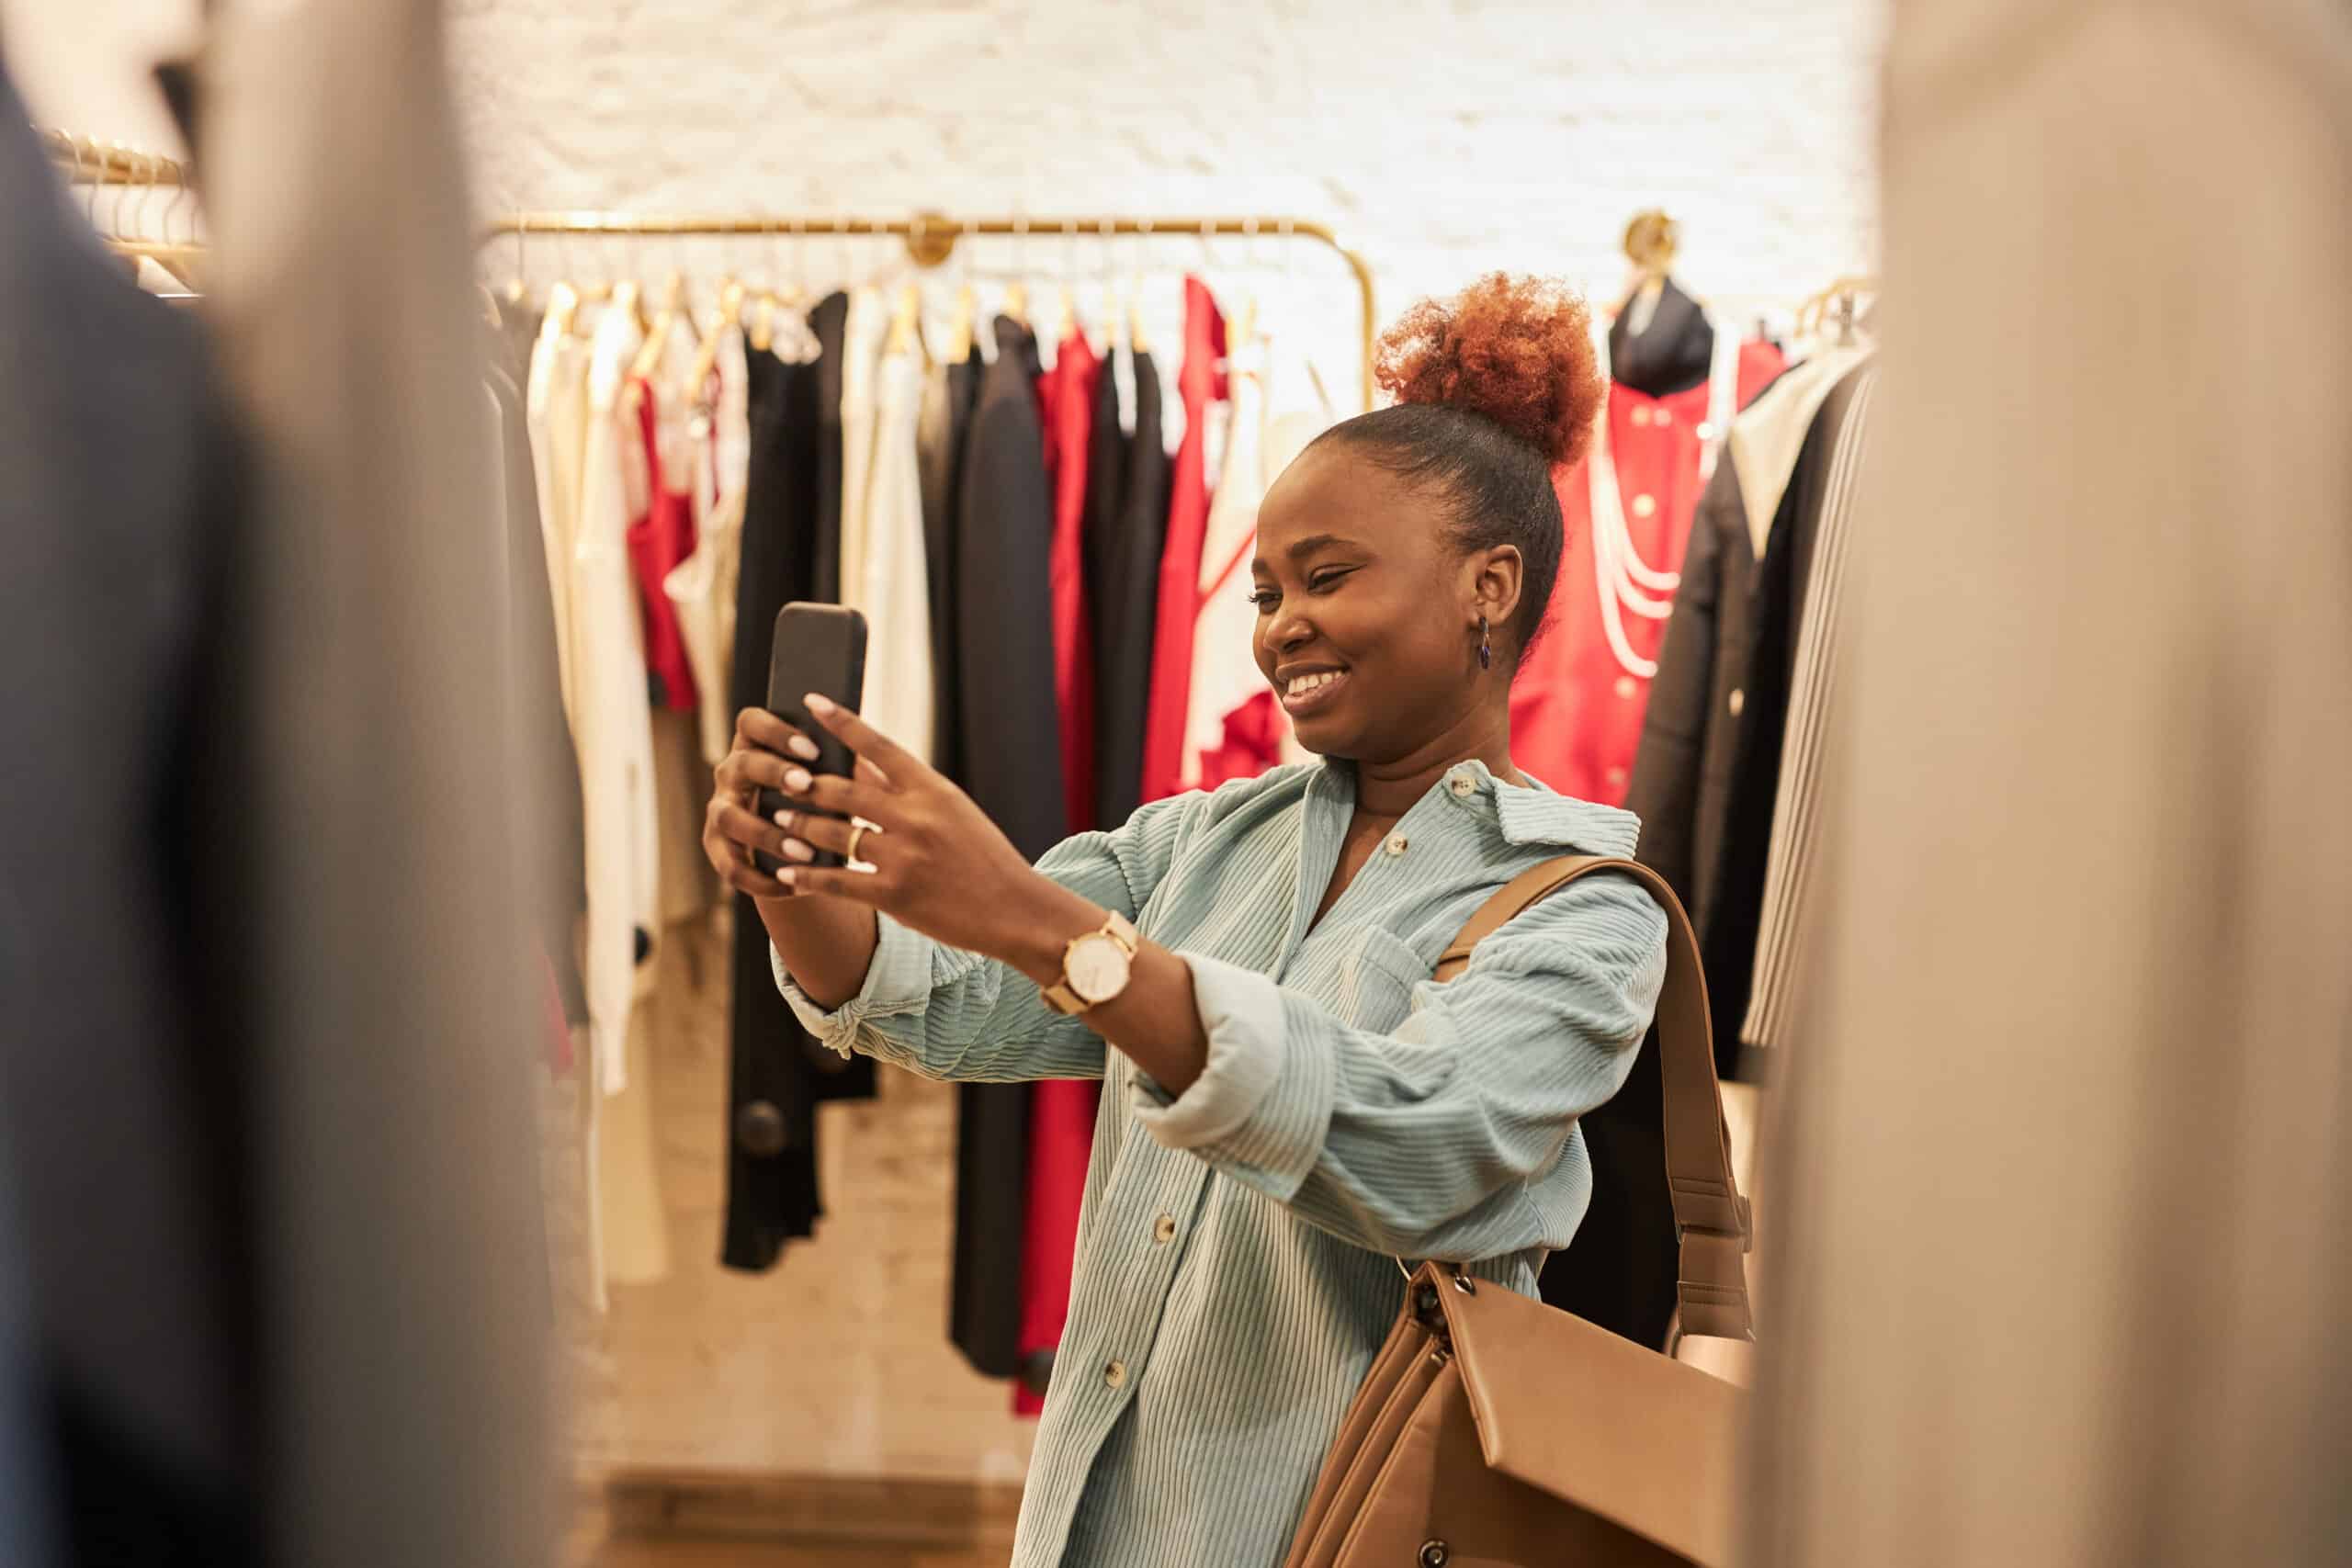 thrifting. Waist up portrait of smiling black woman taking selfie photos in clothing store and enjoying shopping